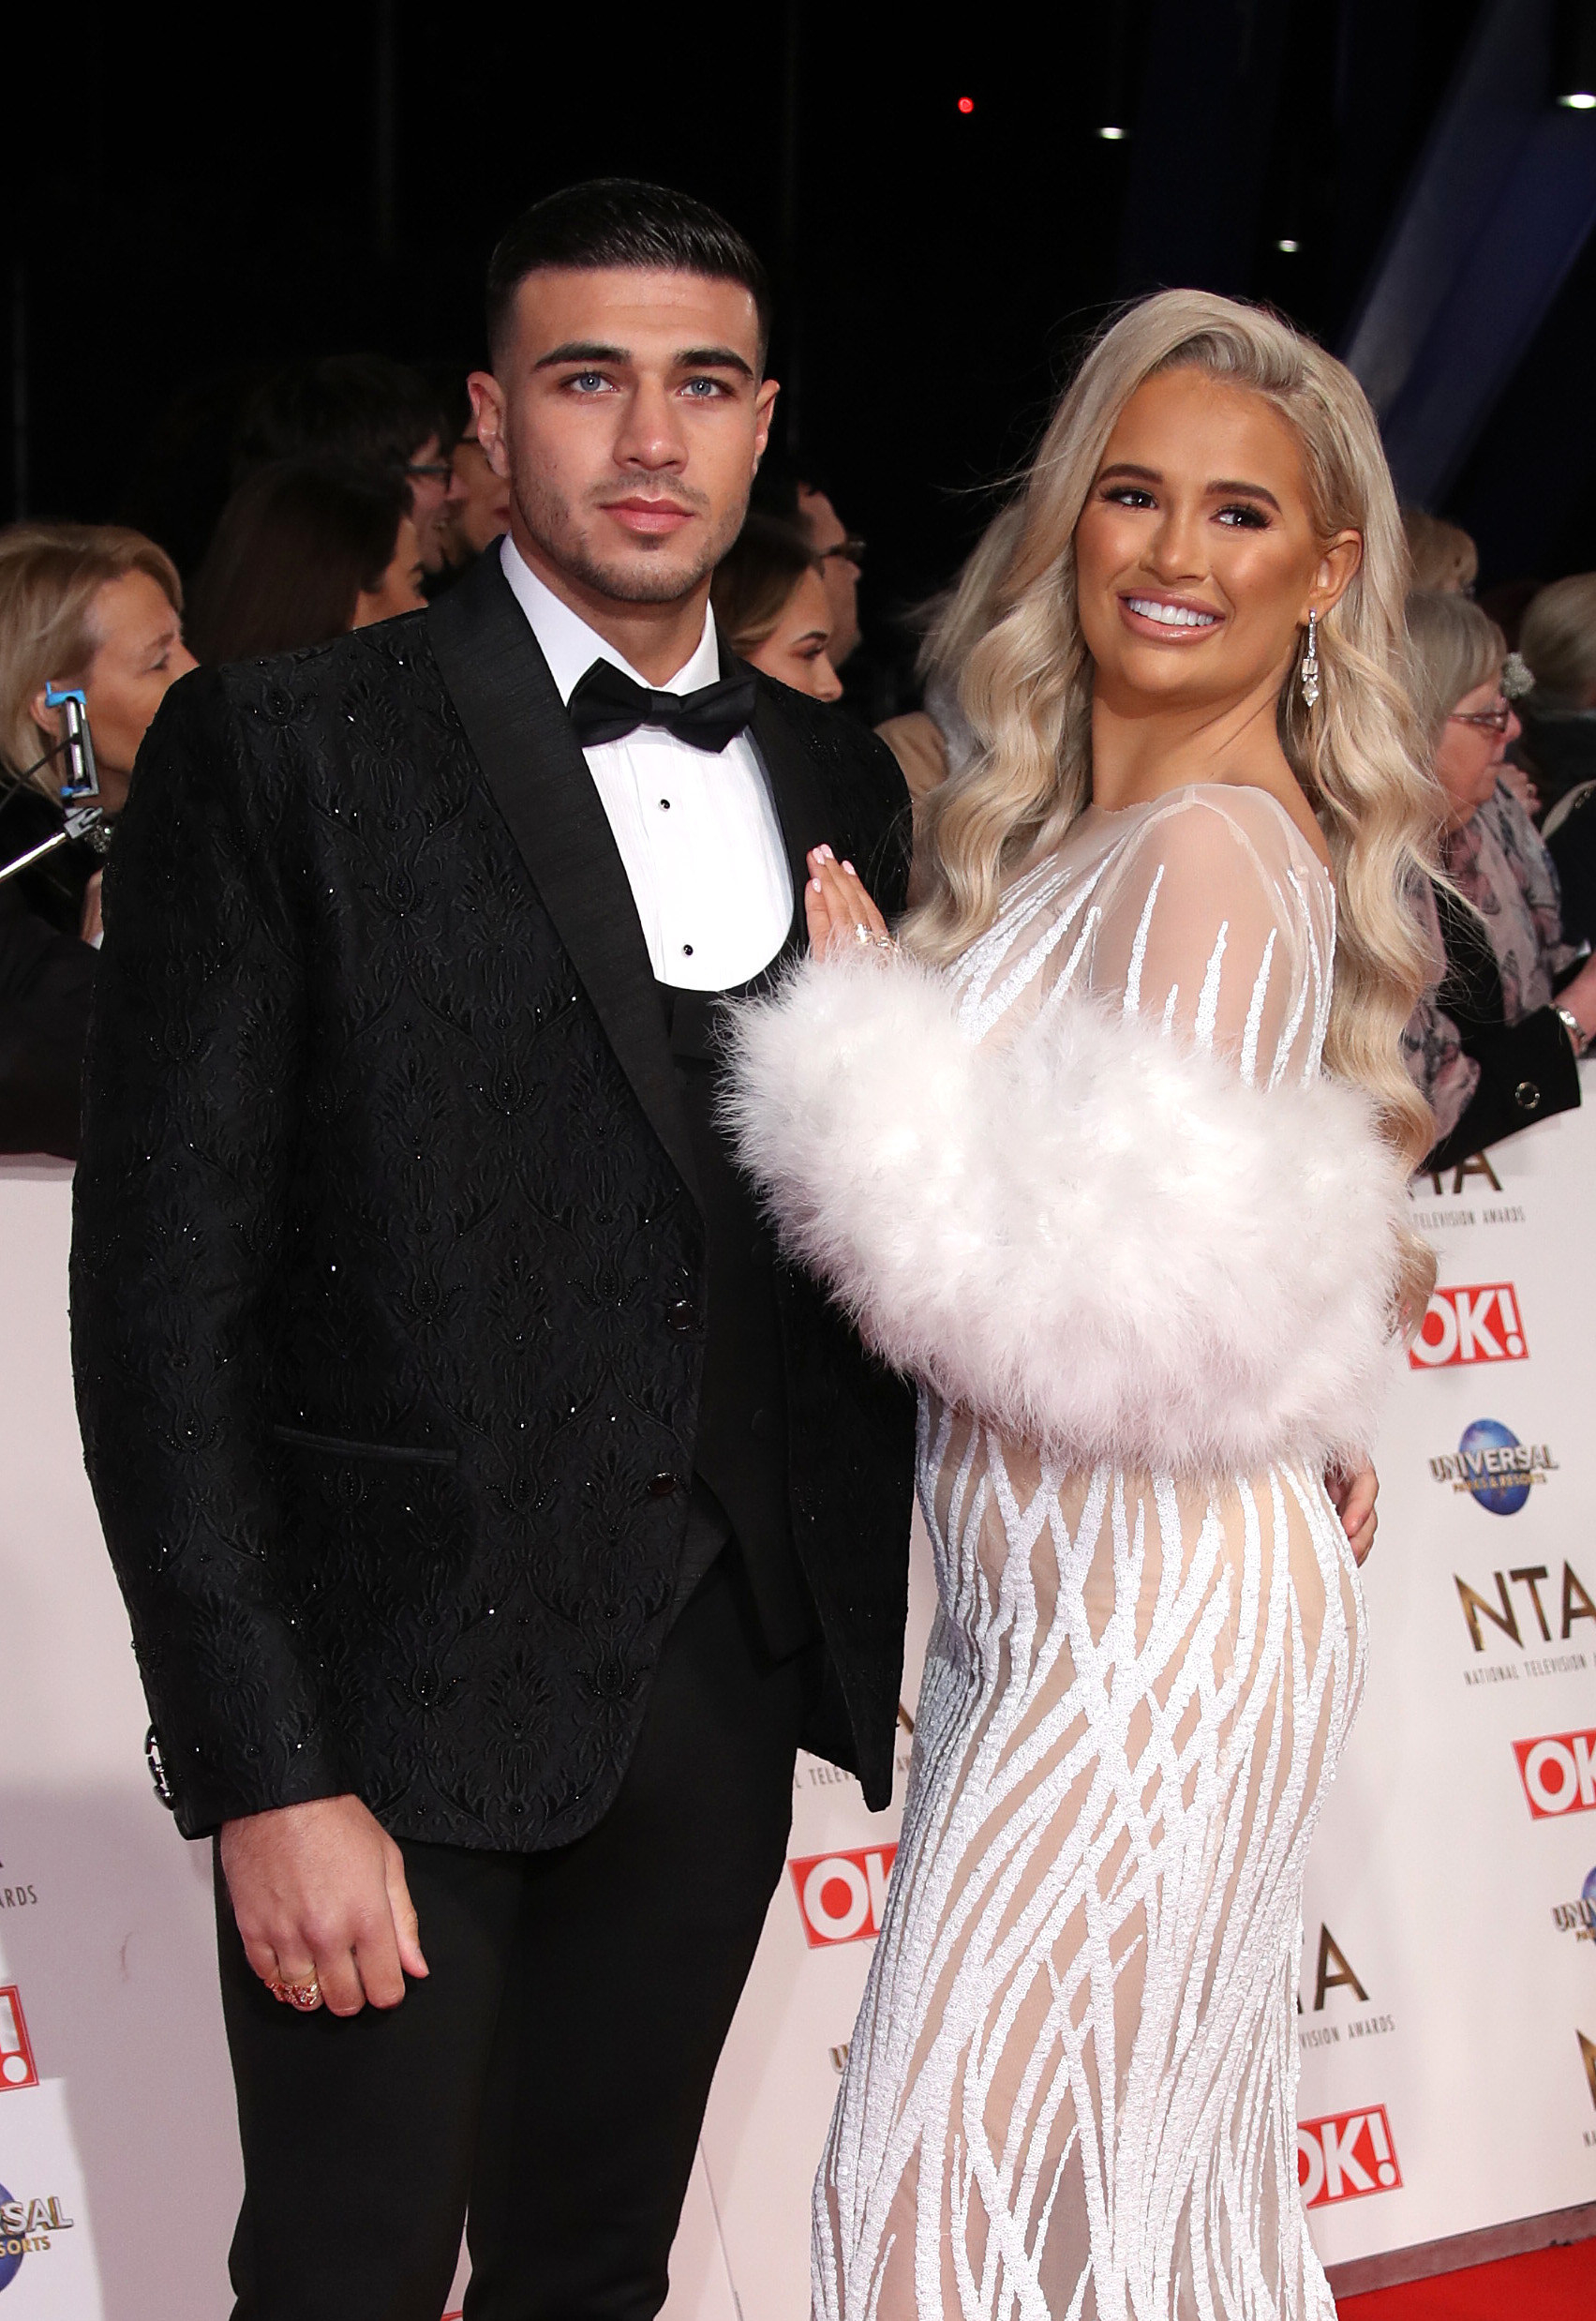 Molly Mae and Tommy Fury attend the National Television Awards in 2020.